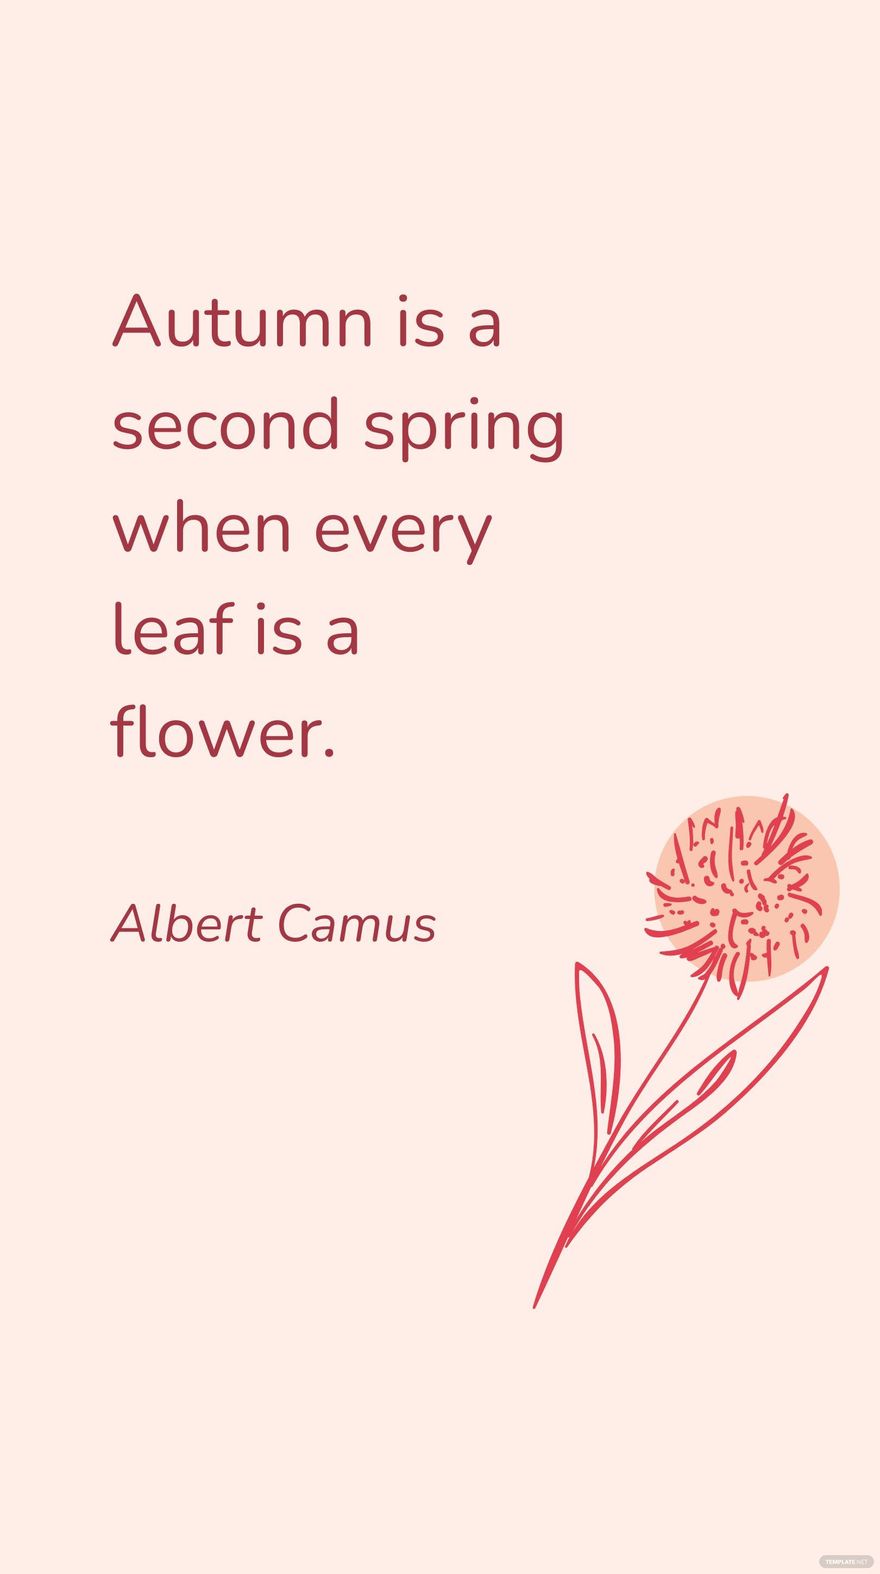 Free Albert Camus - Autumn is a second spring when every leaf is a flower. in JPG